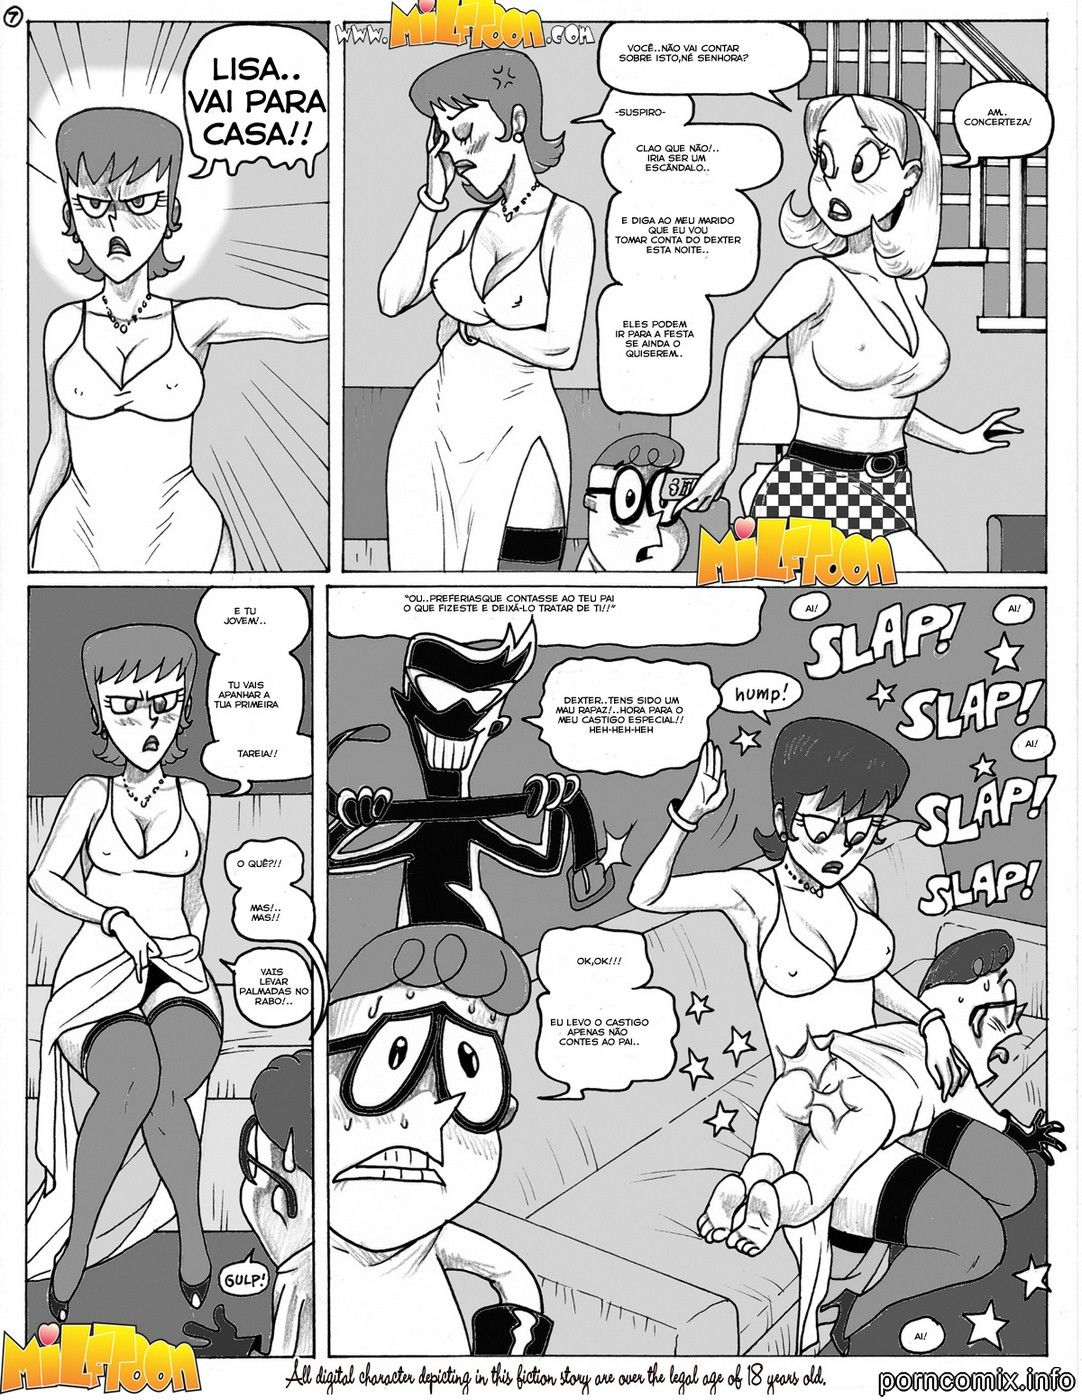 milftoon – dixters この動画は東方projectの二次創 1 page 1